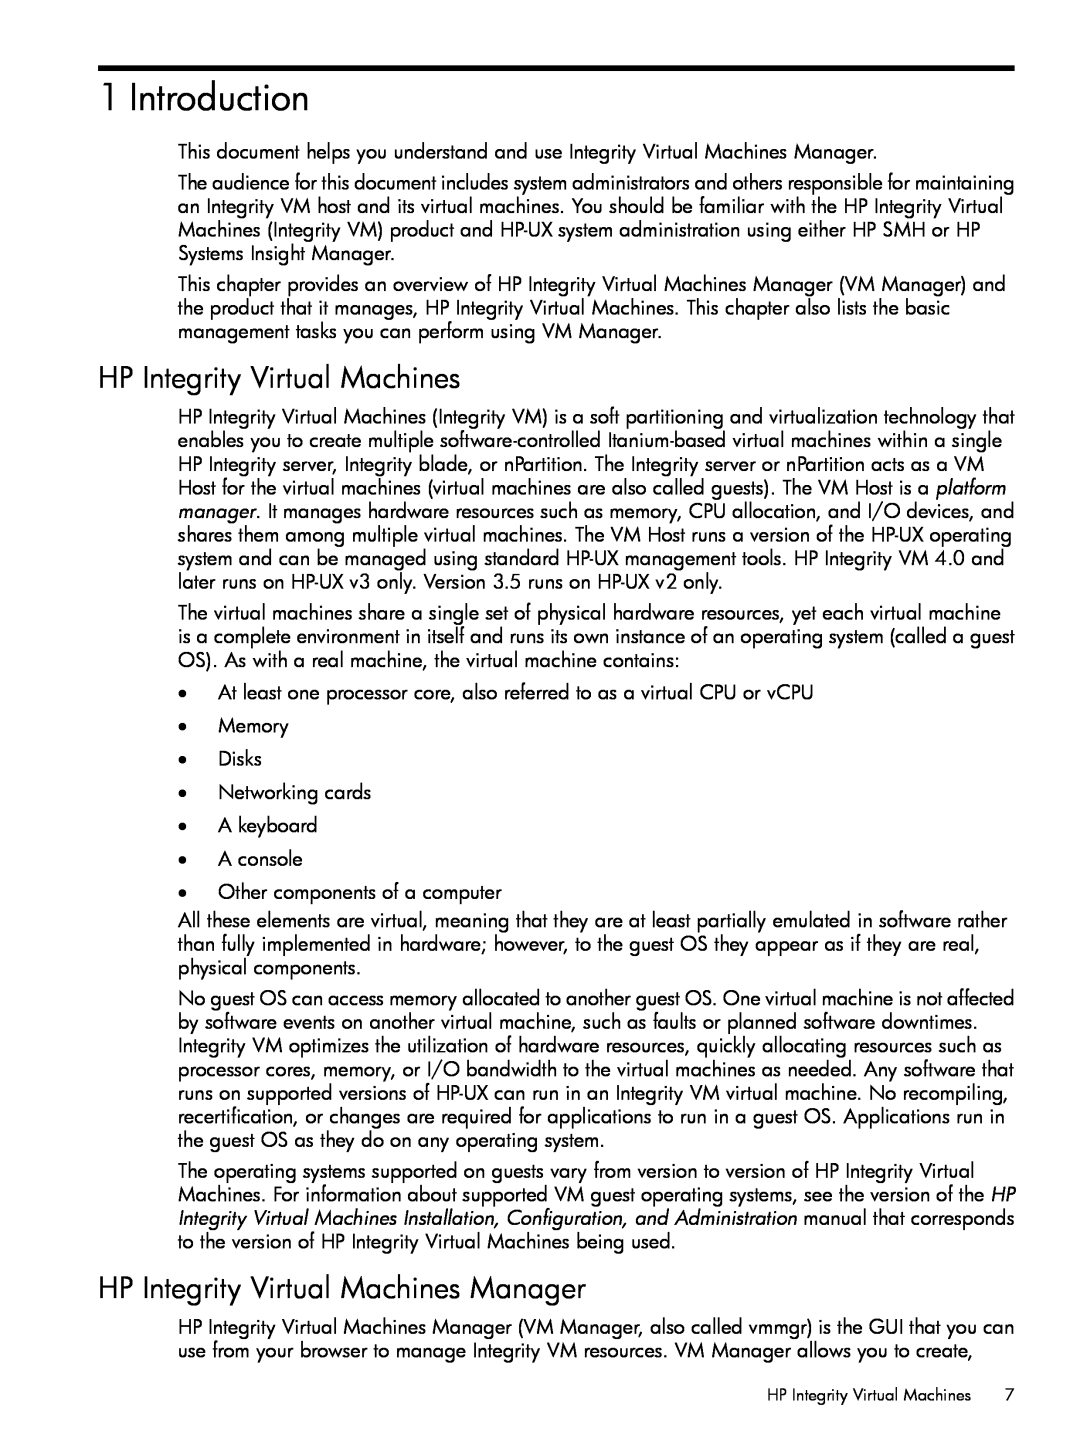 HP UX vPars and Integrity VM v6 manual Introduction, HP Integrity Virtual Machines Manager 